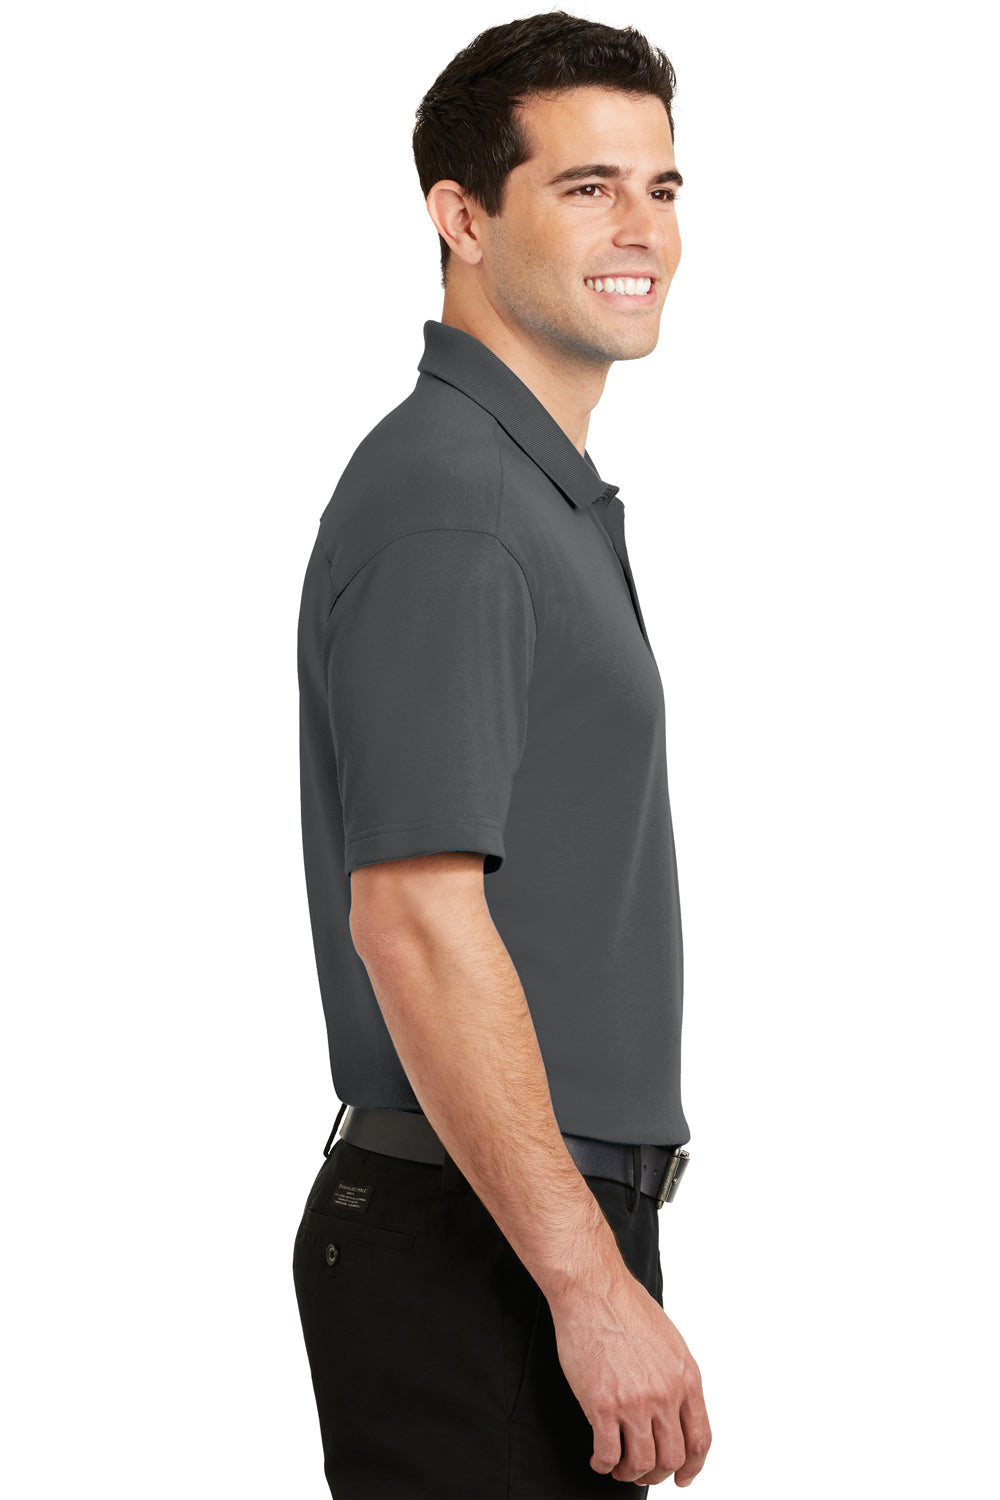 Port Authority K5200 Mens Silk Touch Performance Moisture Wicking Short Sleeve Polo Shirt Sterling Grey Side